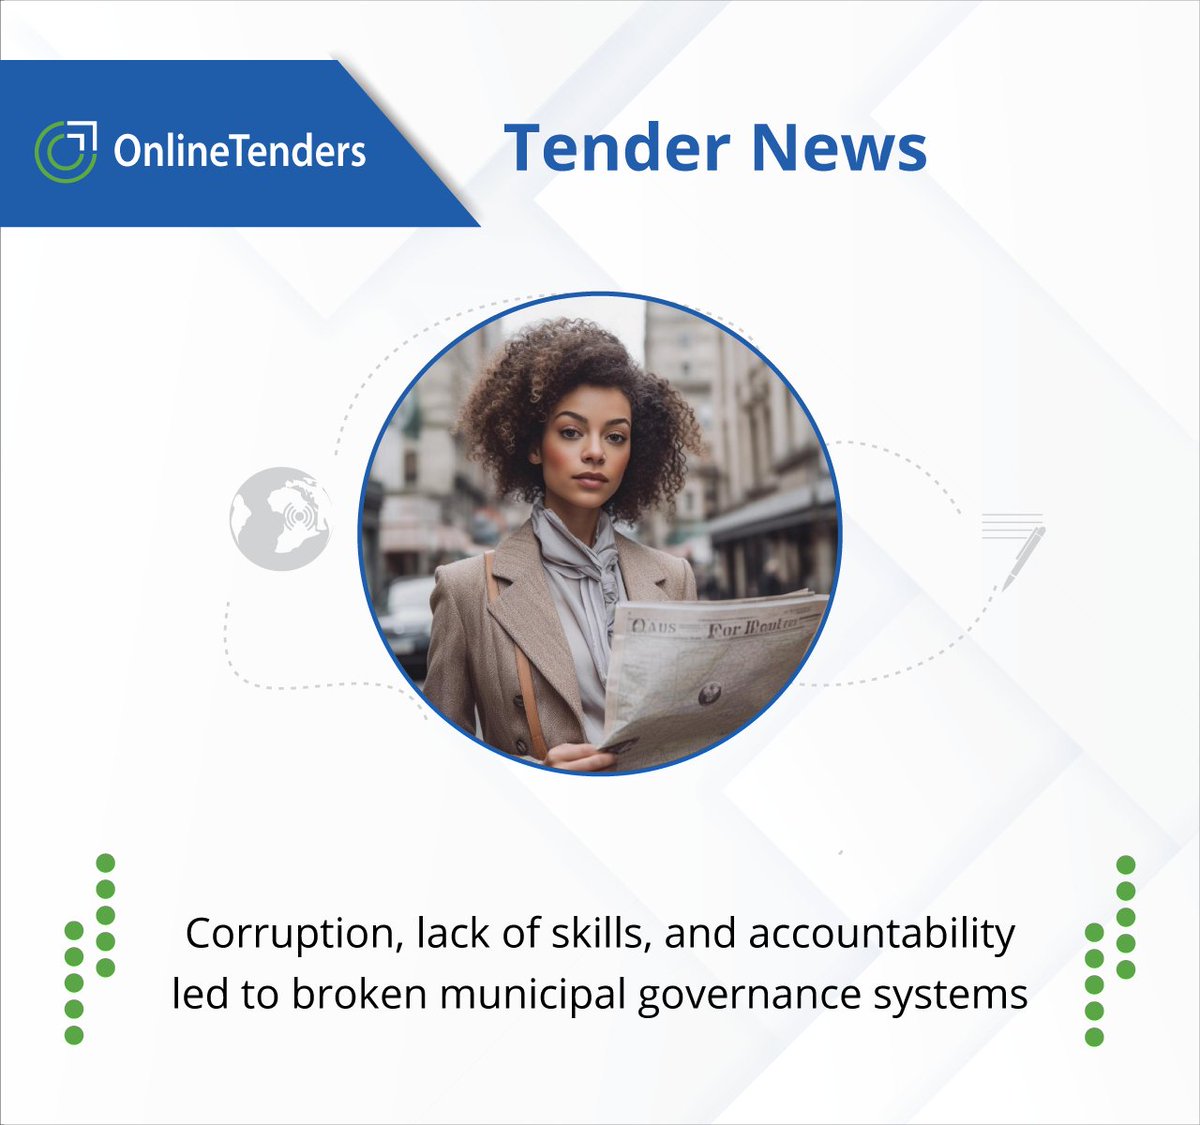 Latest Tender News: Corruption, lack of skills, and accountability led to broken municipal governance systems

#news #tendernews #businessnews #sagovernment #southafricanbusiness #onlinetenders

onlinetenders.co.za/news/broken-mu…